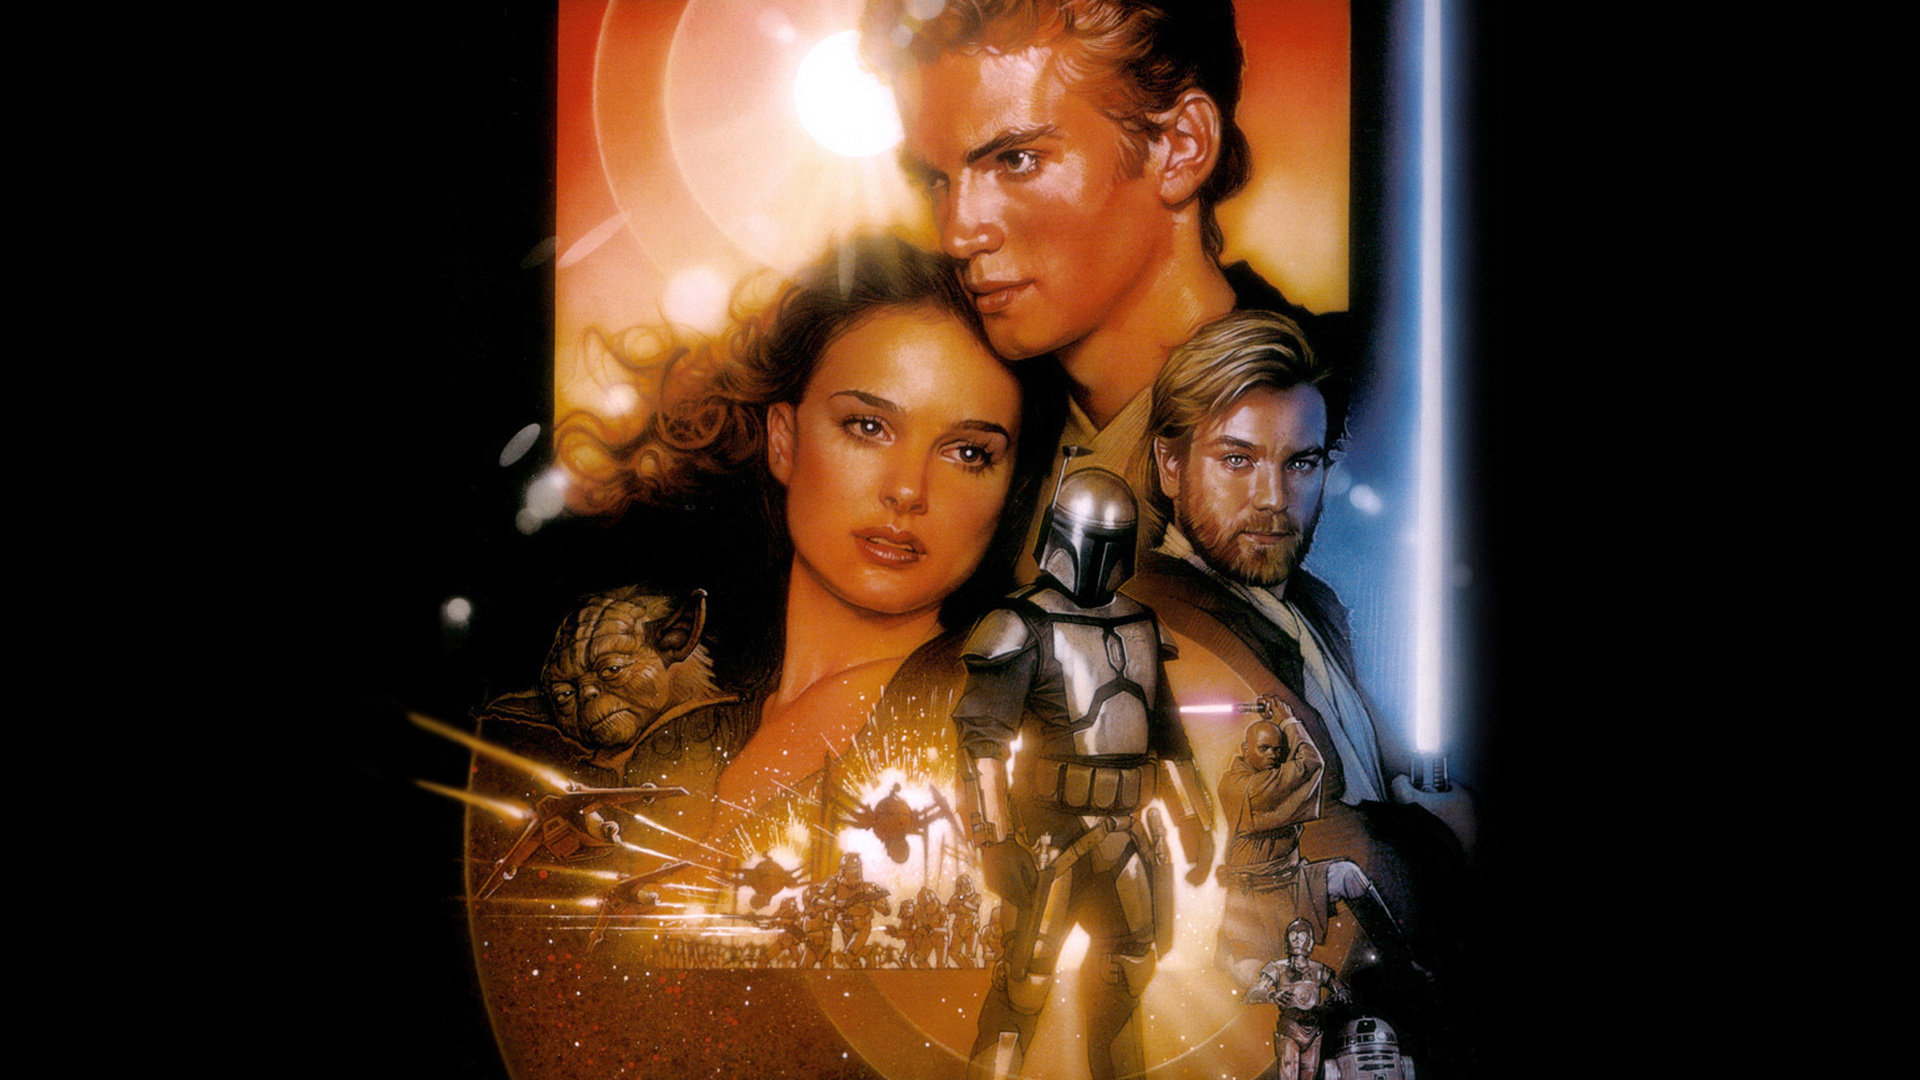 Awesome Star Wars Episode 2 (II): Attack Of The Clones free wallpaper ID:194118 for full hd 1920x1080 computer